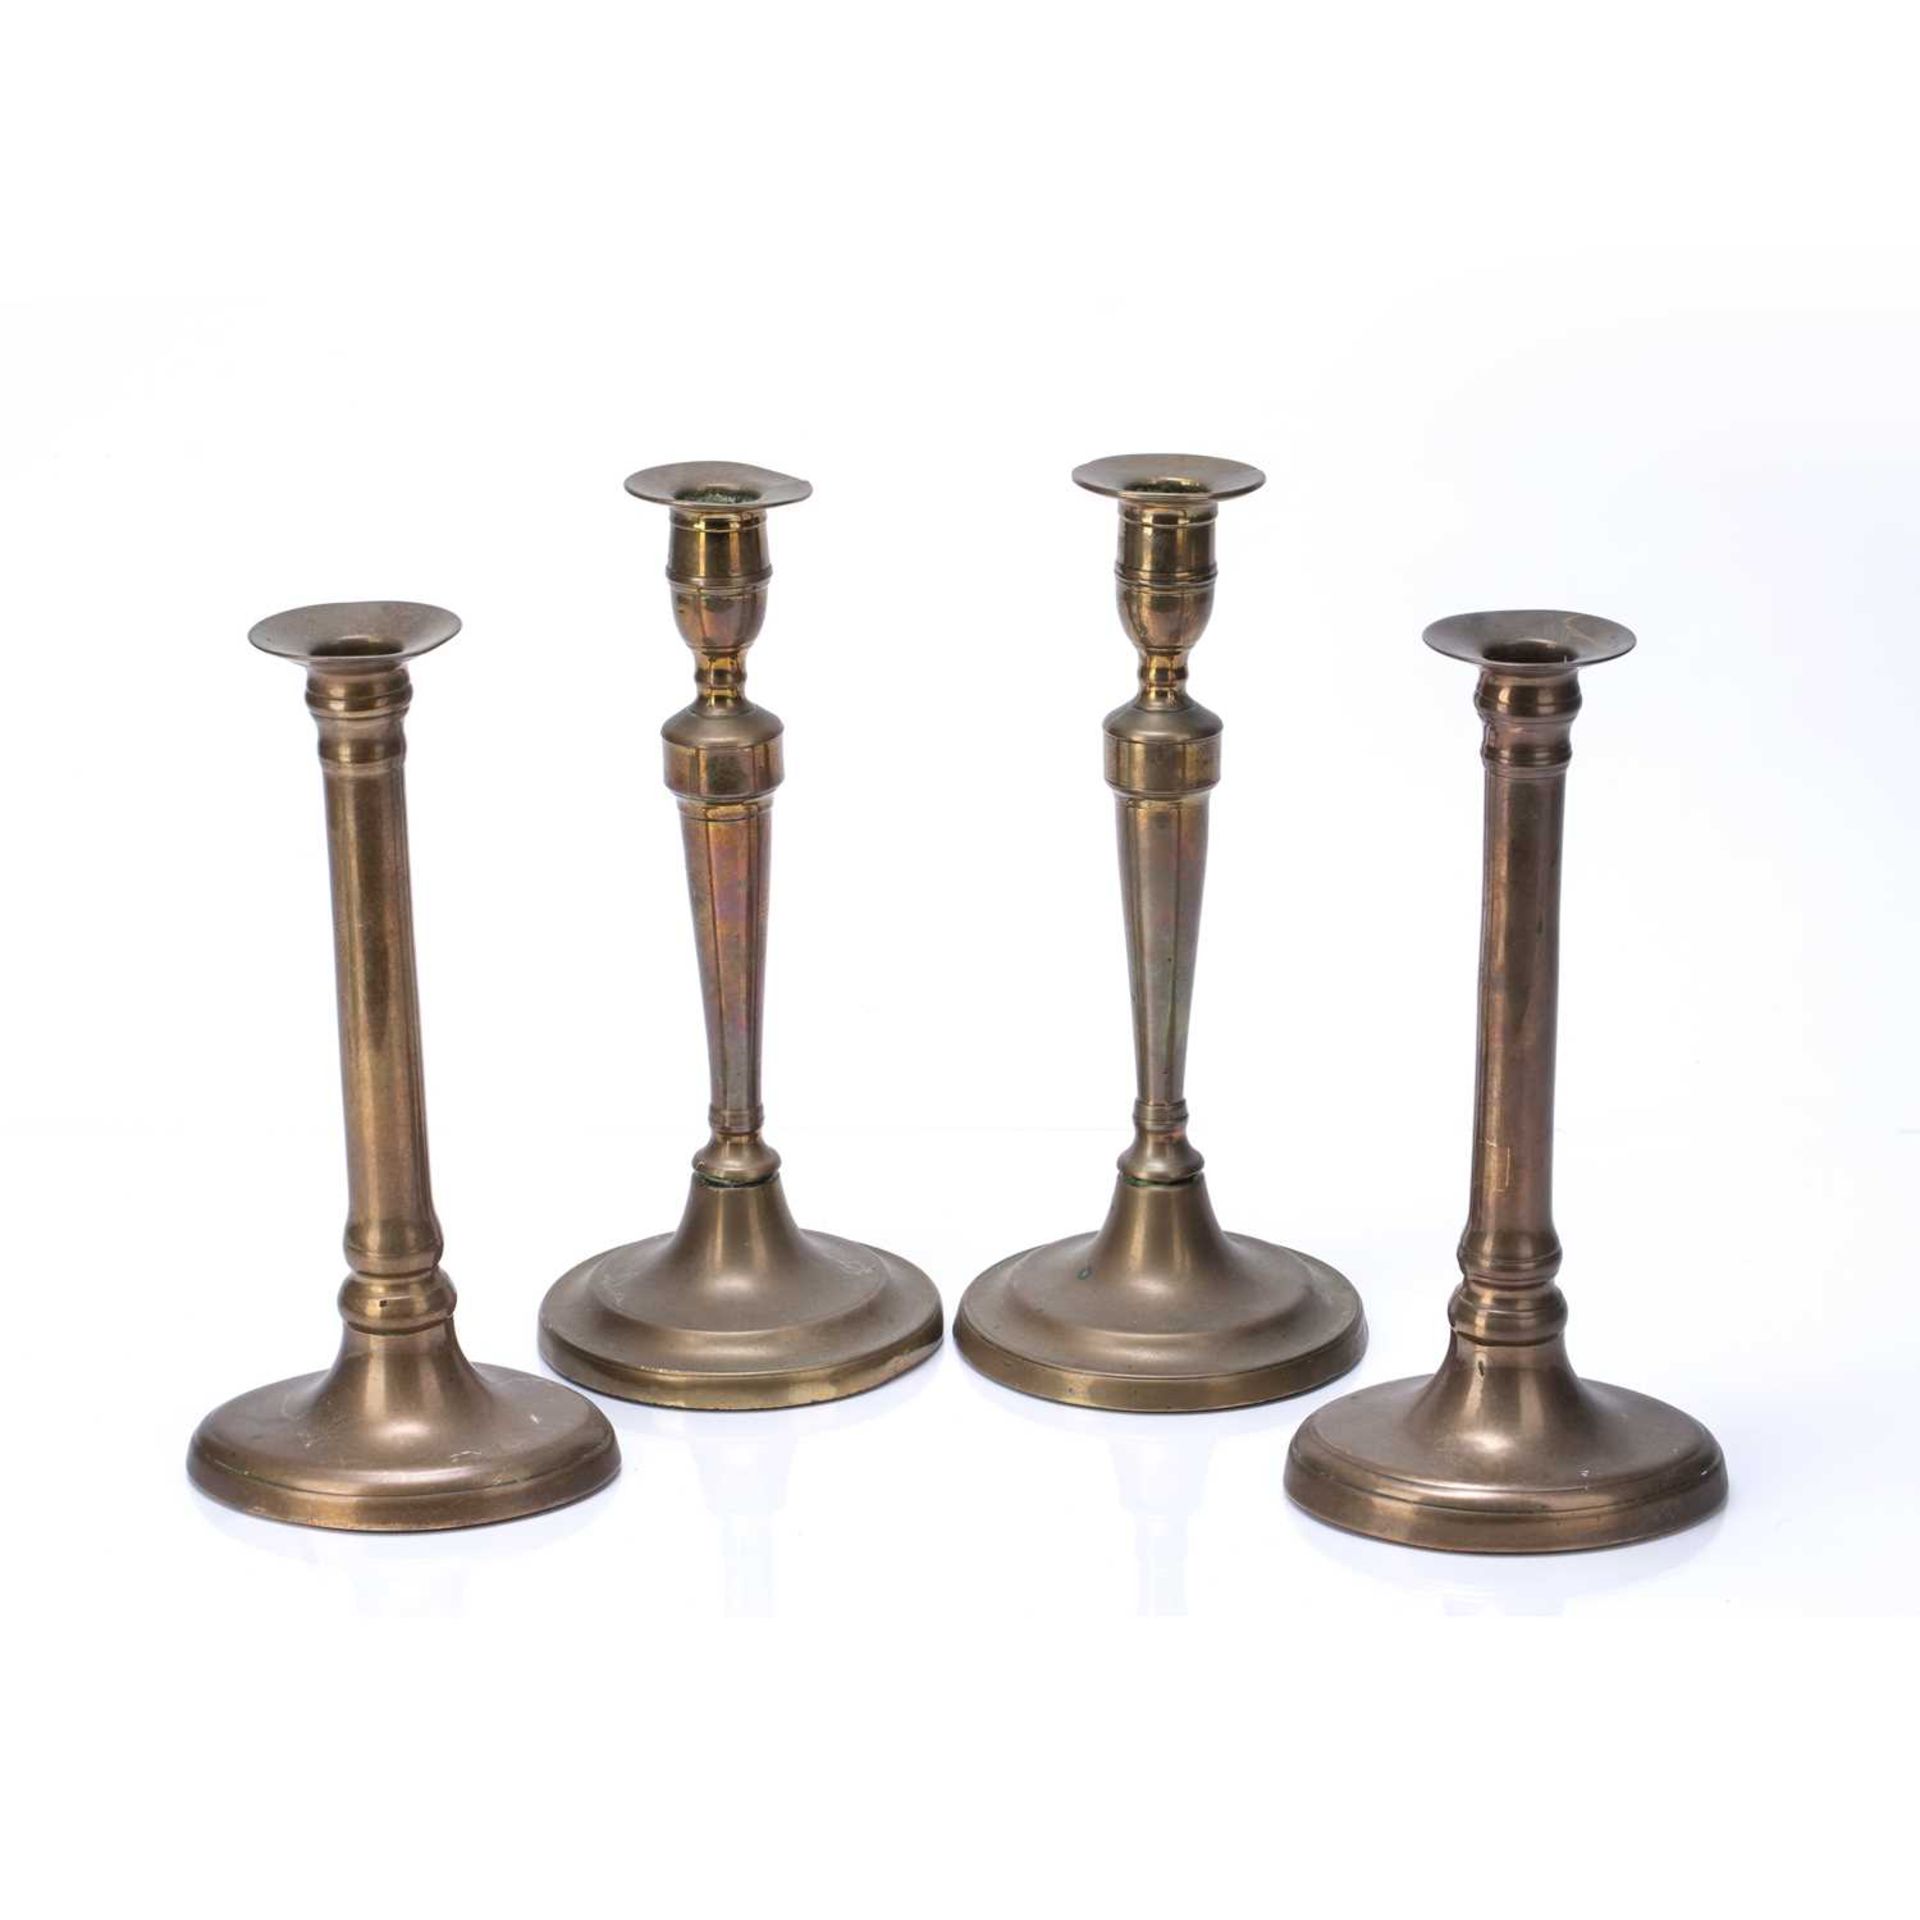 Two pairs of brass candle sticks one pair on a circular base, 25.5cm high, the other on navette